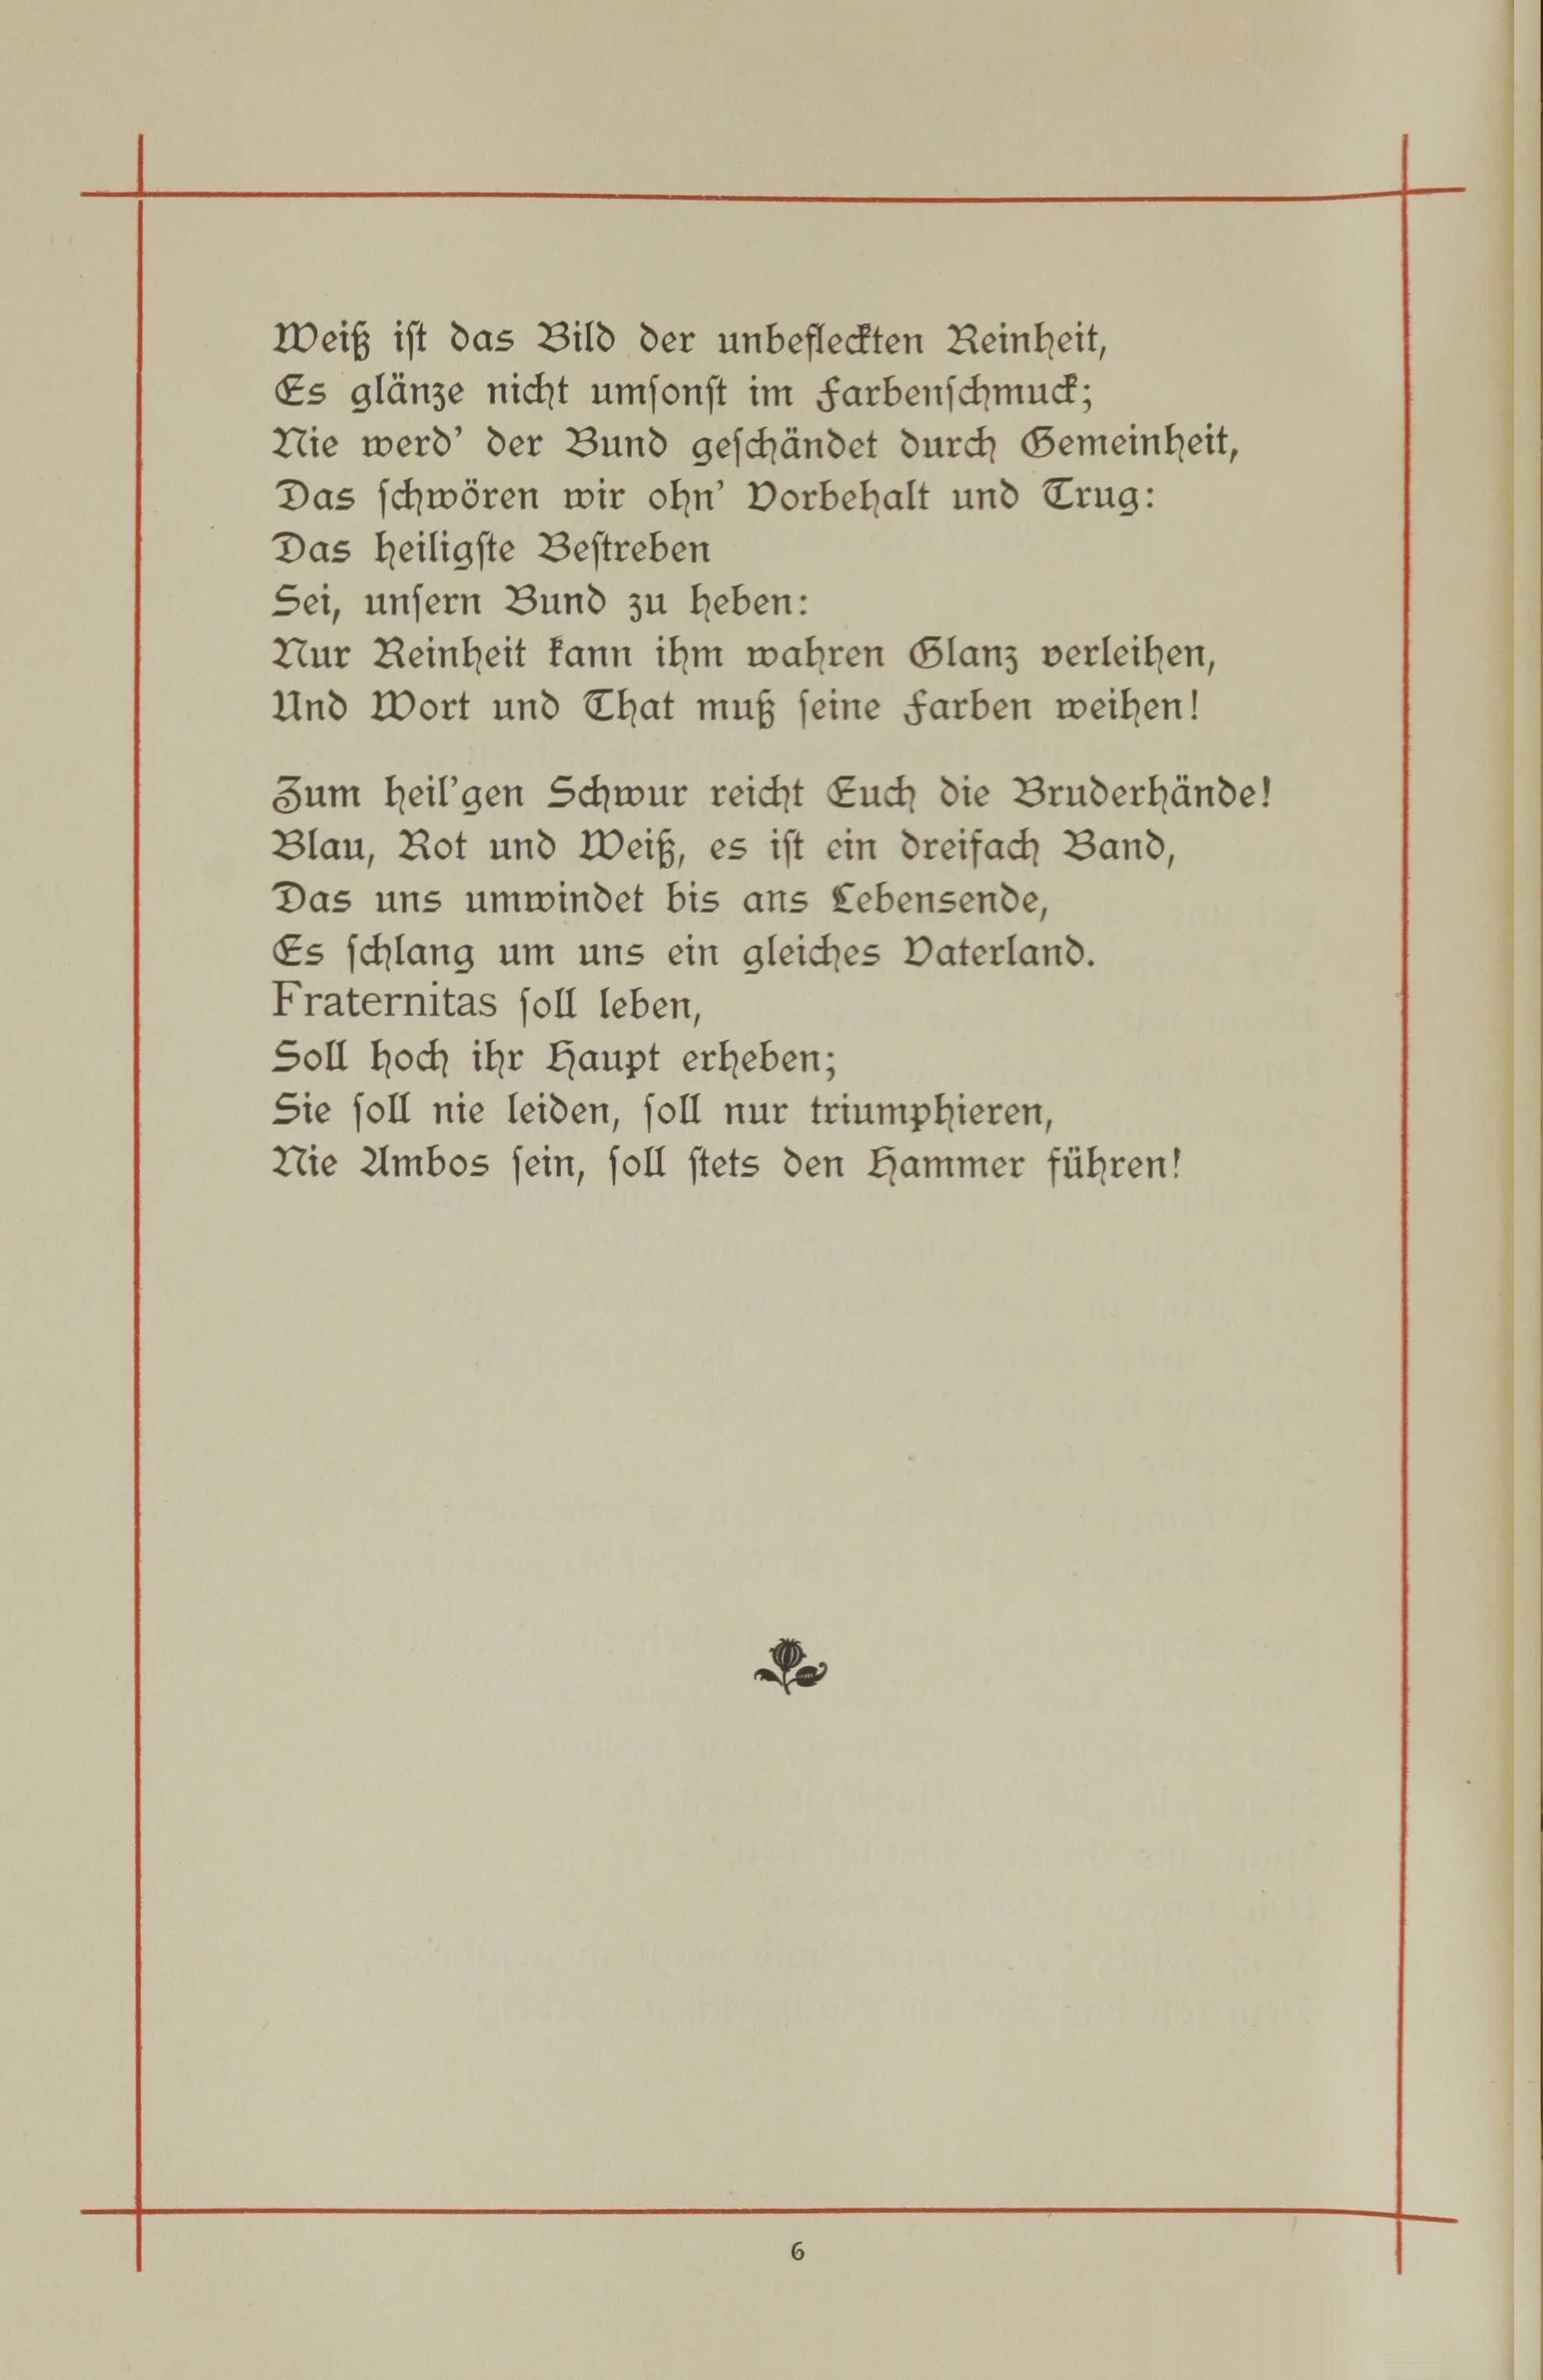 Farbenlied (1893) | 2. (6) Main body of text